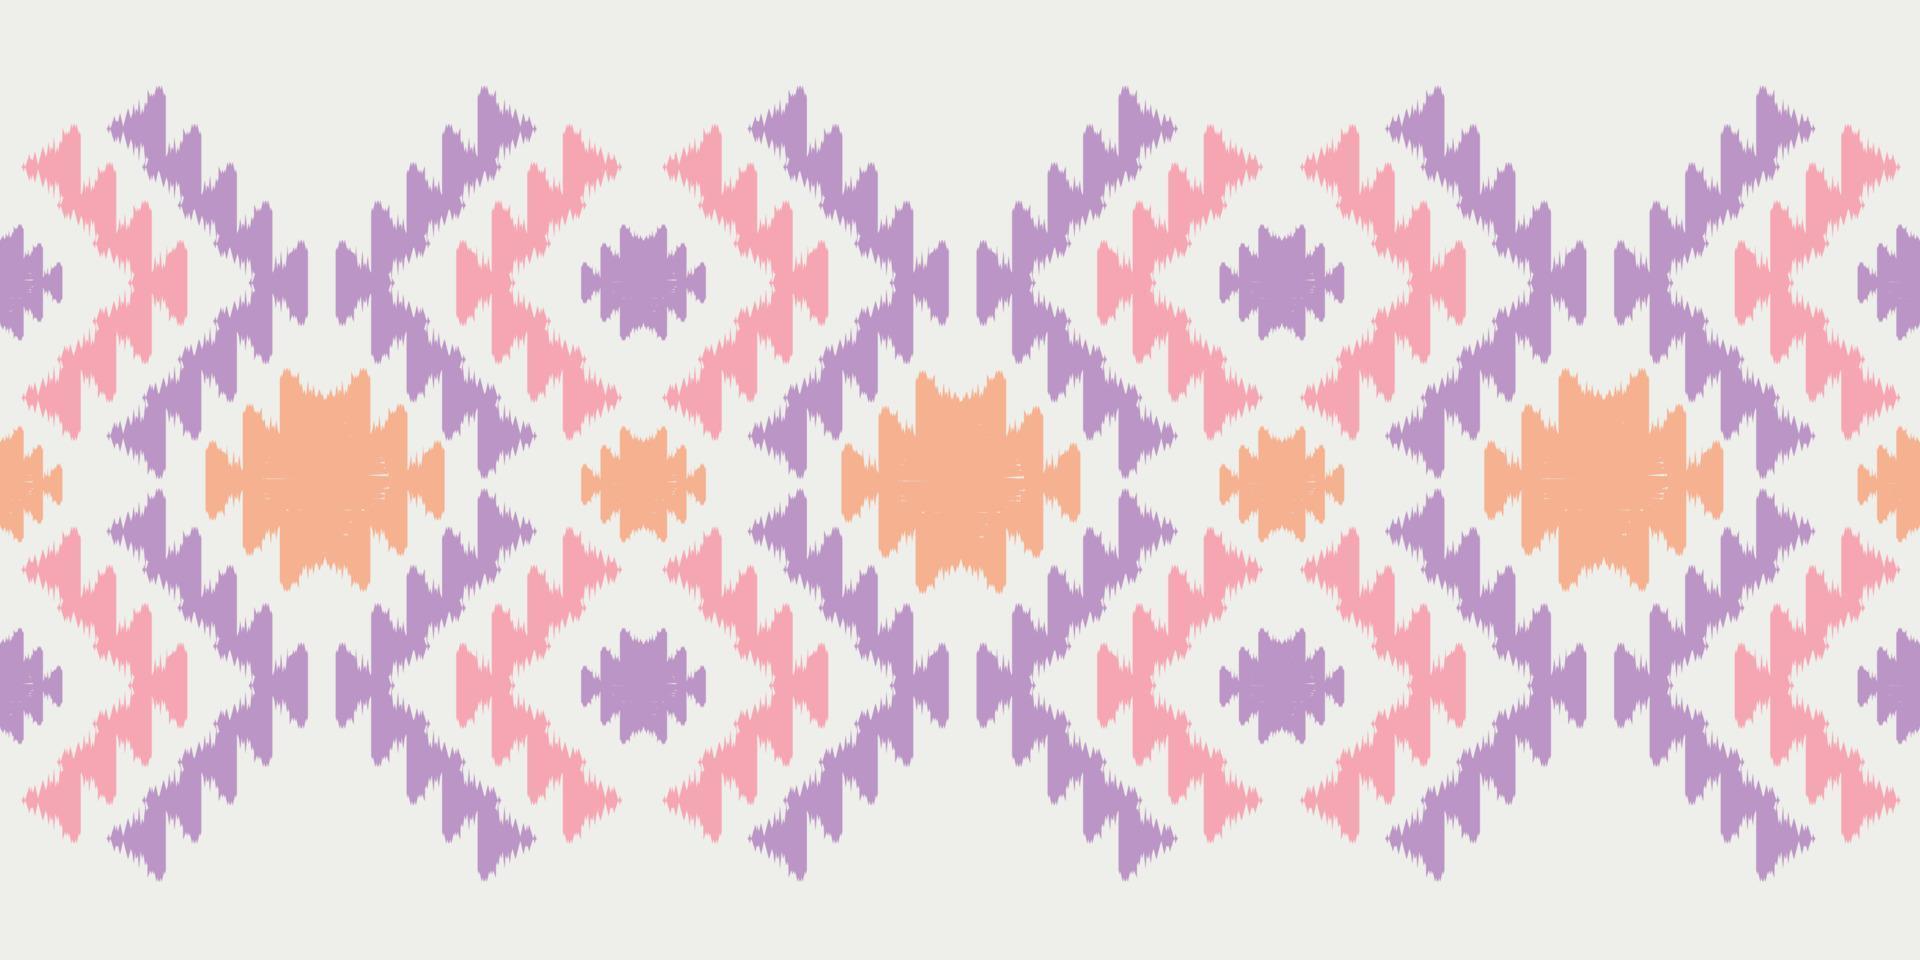 Ikat Handmade borders beautiful pastel art. Navajo chevron seamless pattern in tribal, folk embroidery, Mexican Aztec geometric art ornament print.Design for carpet, wrapping, fabric, cover, textile vector